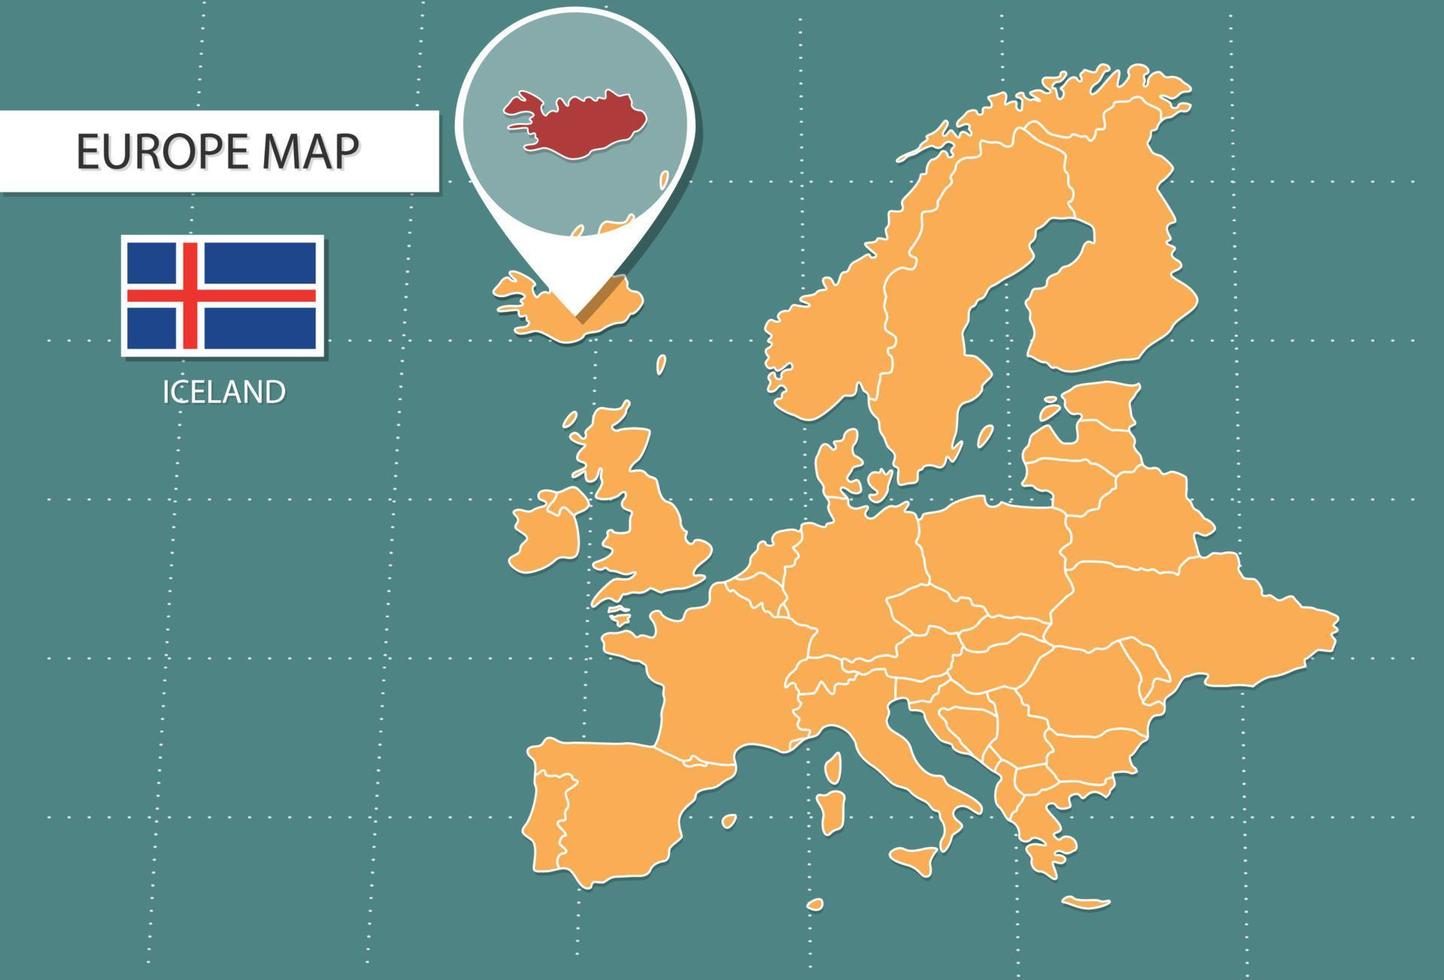 Iceland map in Europe zoom version, icons showing Iceland location and flags. vector